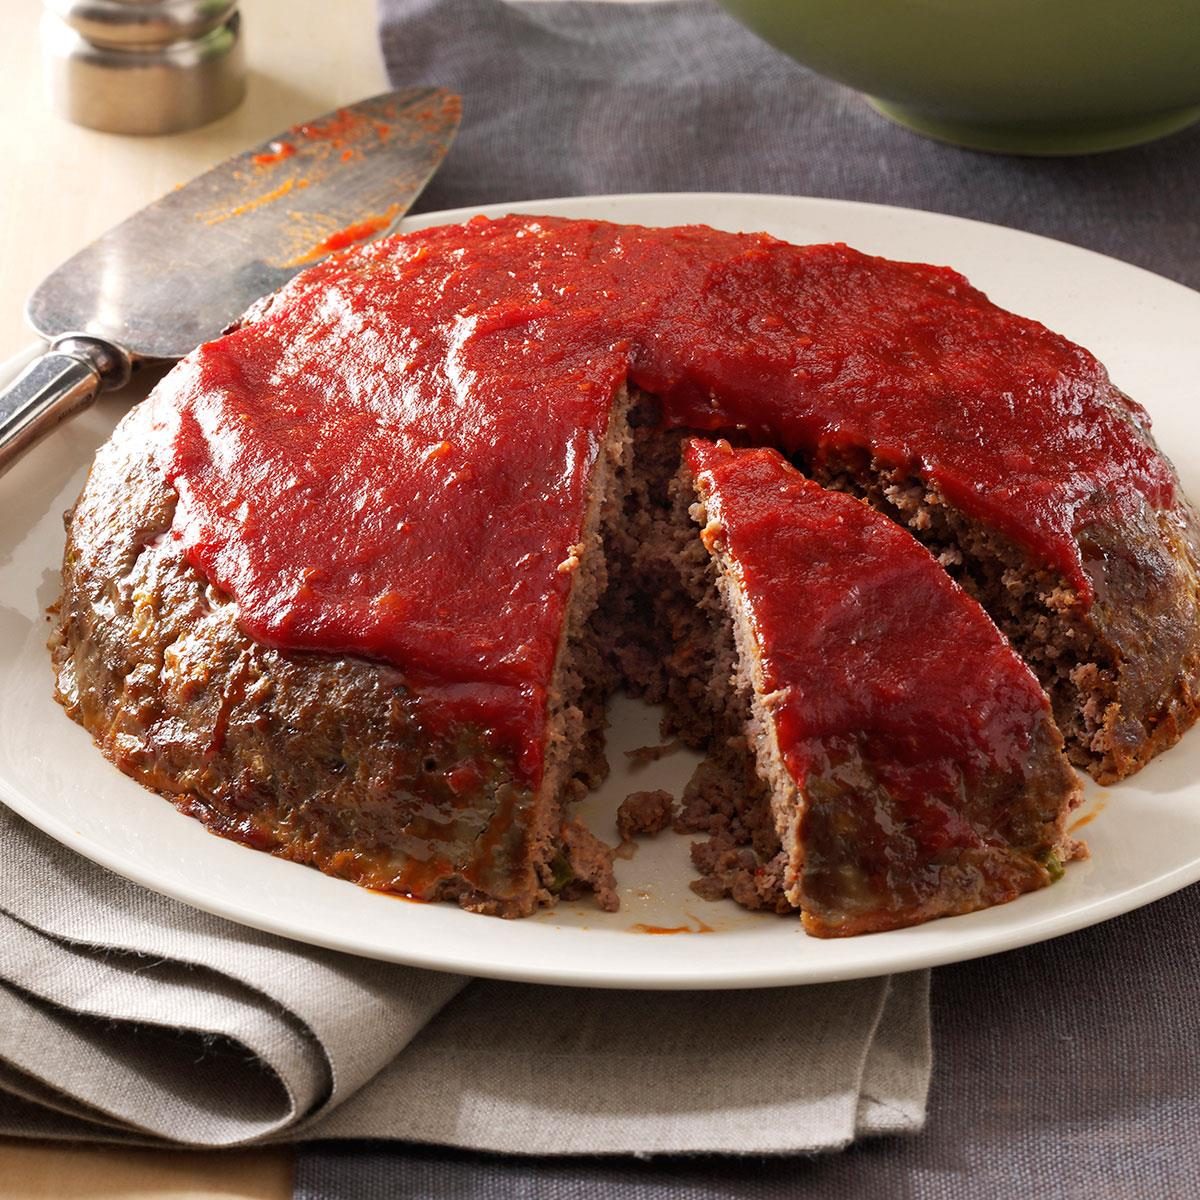 Meat Loaf with Chili Sauce